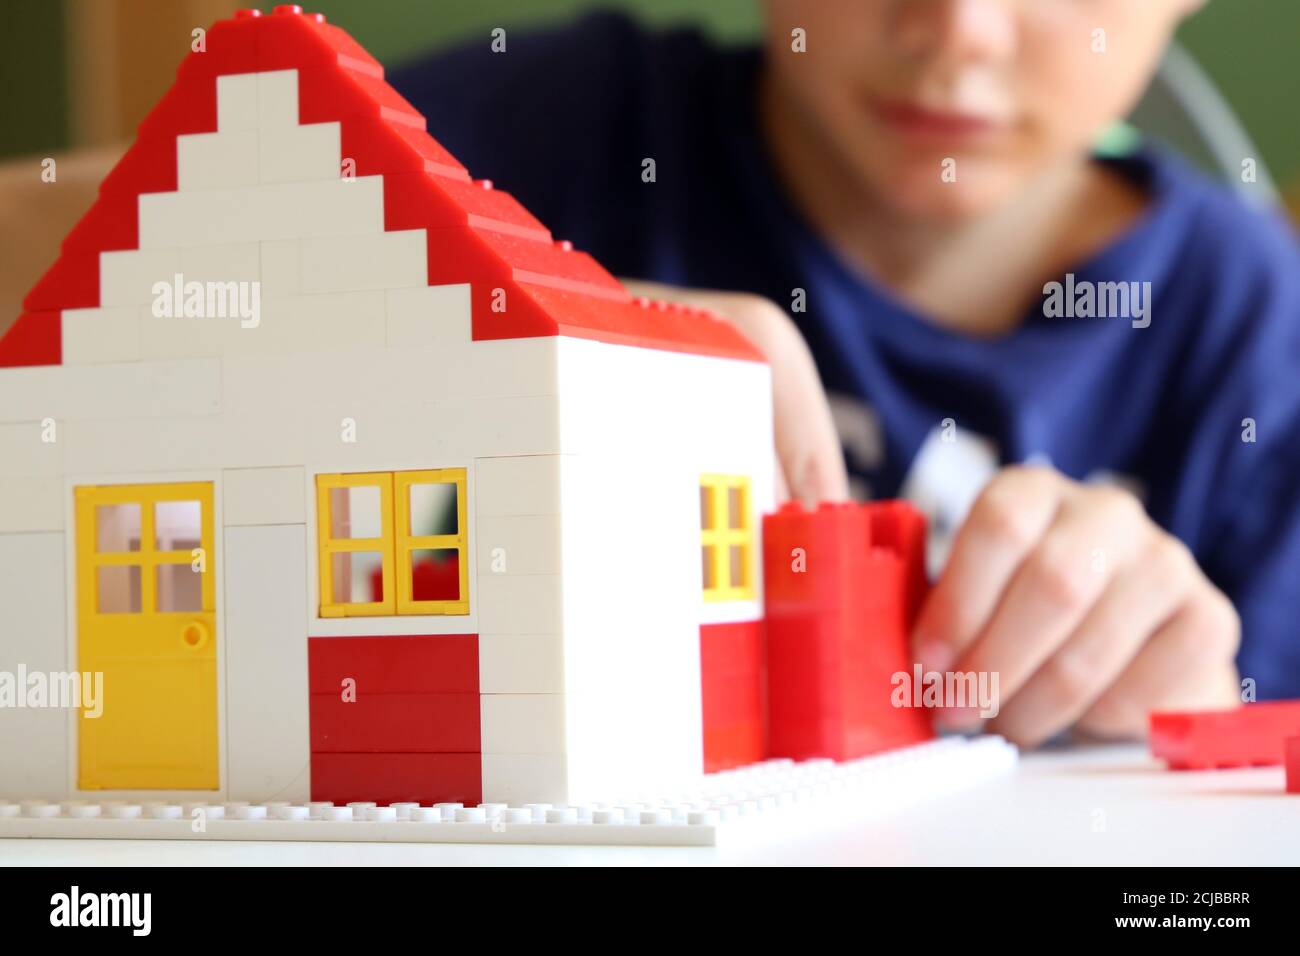 Symbol image: Boy builds a house with building blocks (Model released) Stock Photo